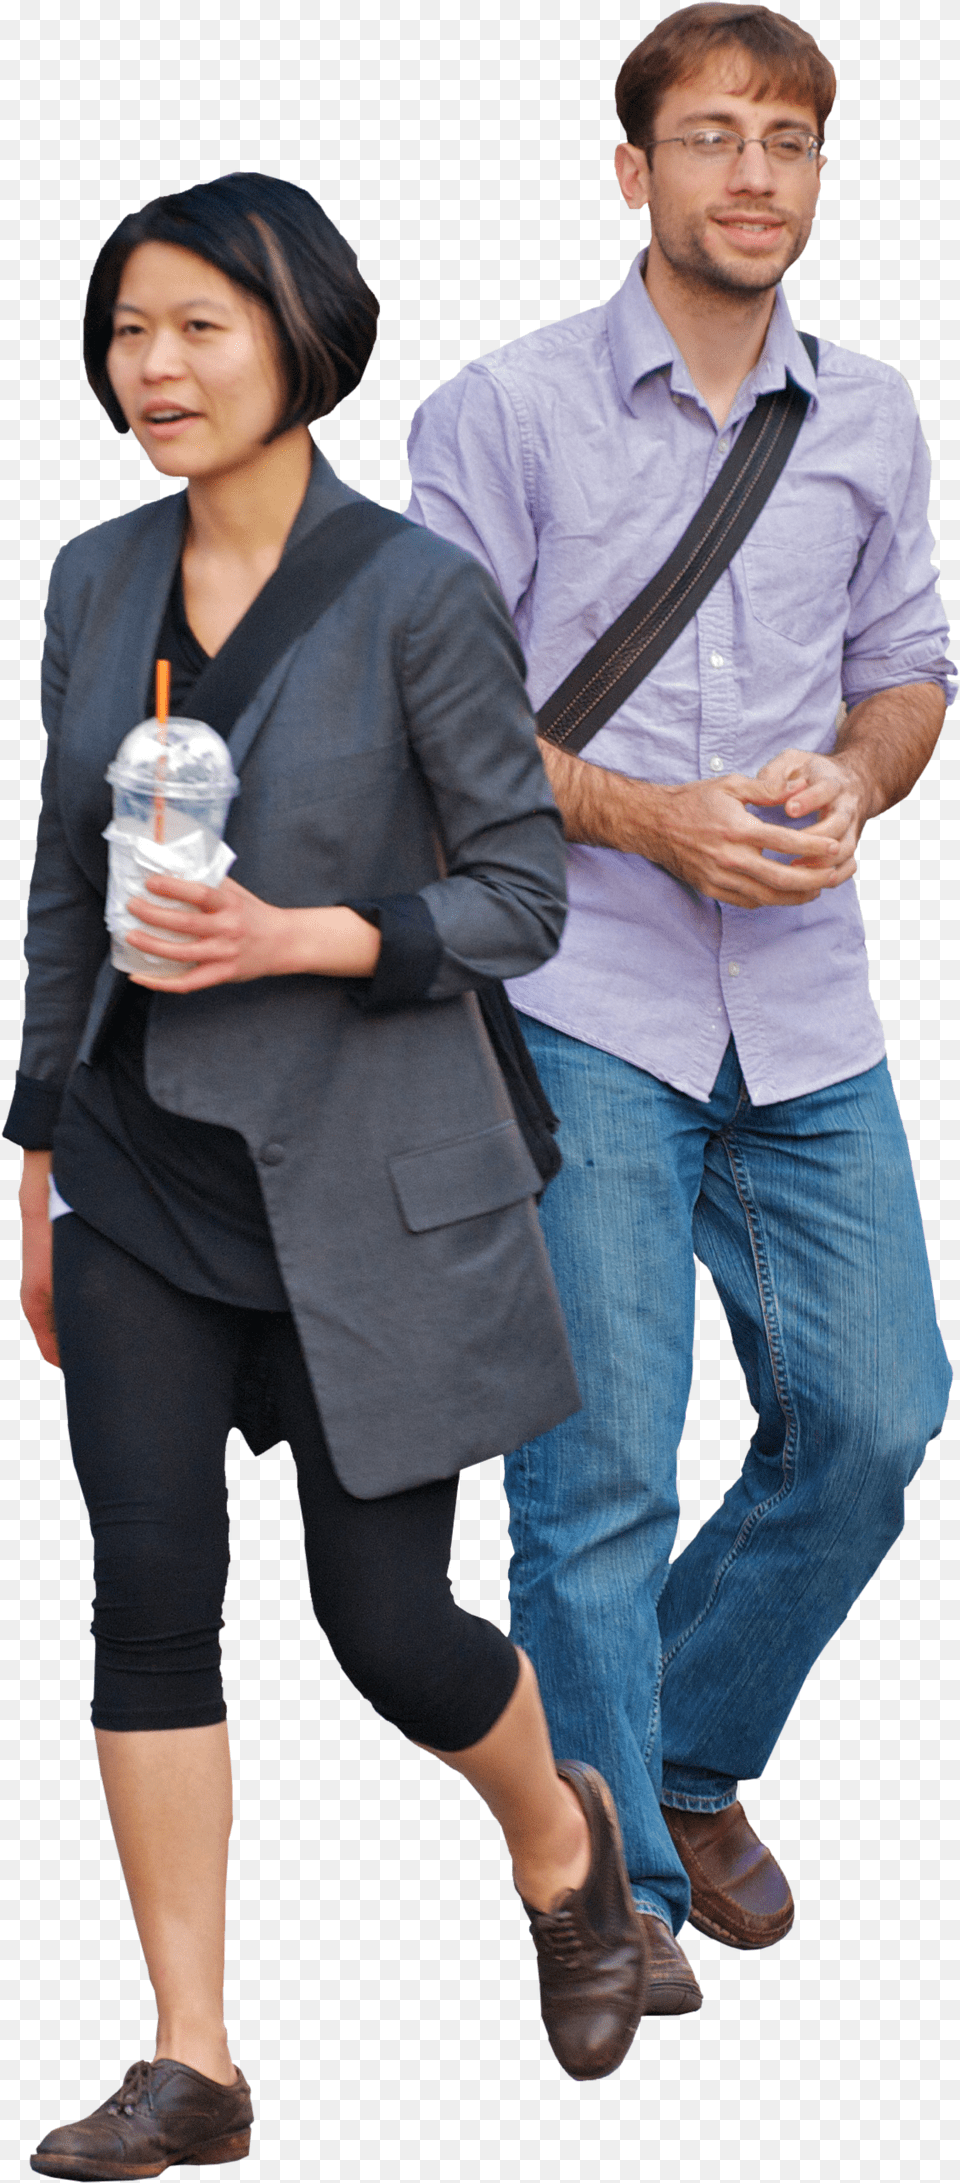 Cut Out People For Photoshop Images Graphic Design, Adult, Sleeve, Shoe, Person Png Image